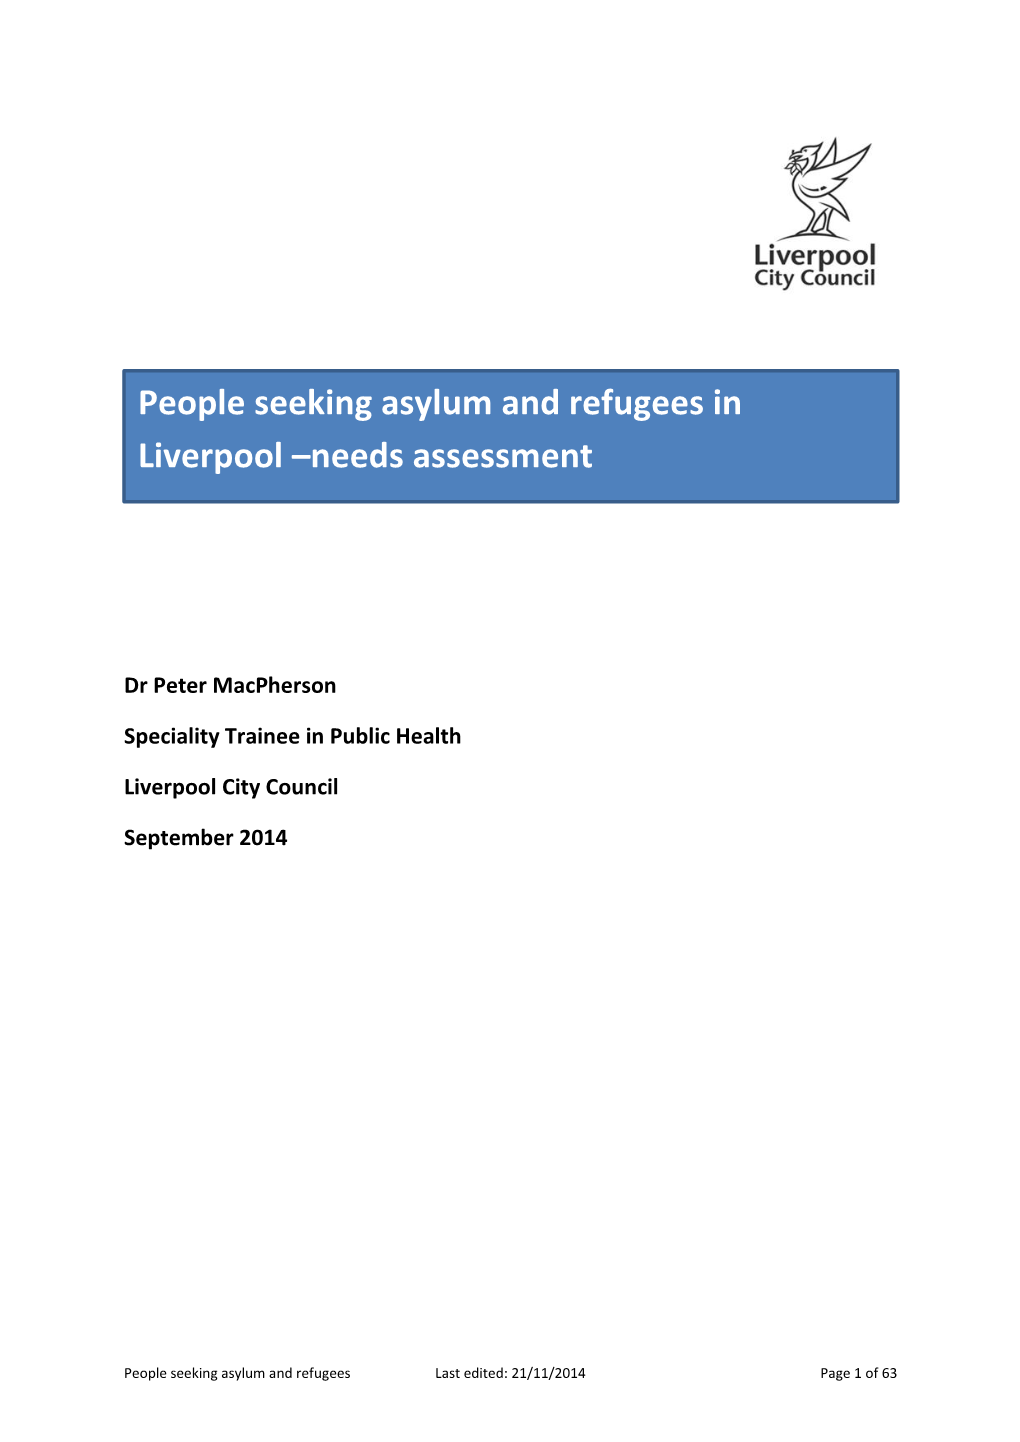 People Seeking Asylum and Refugees in Liverpool –Needs Assessment